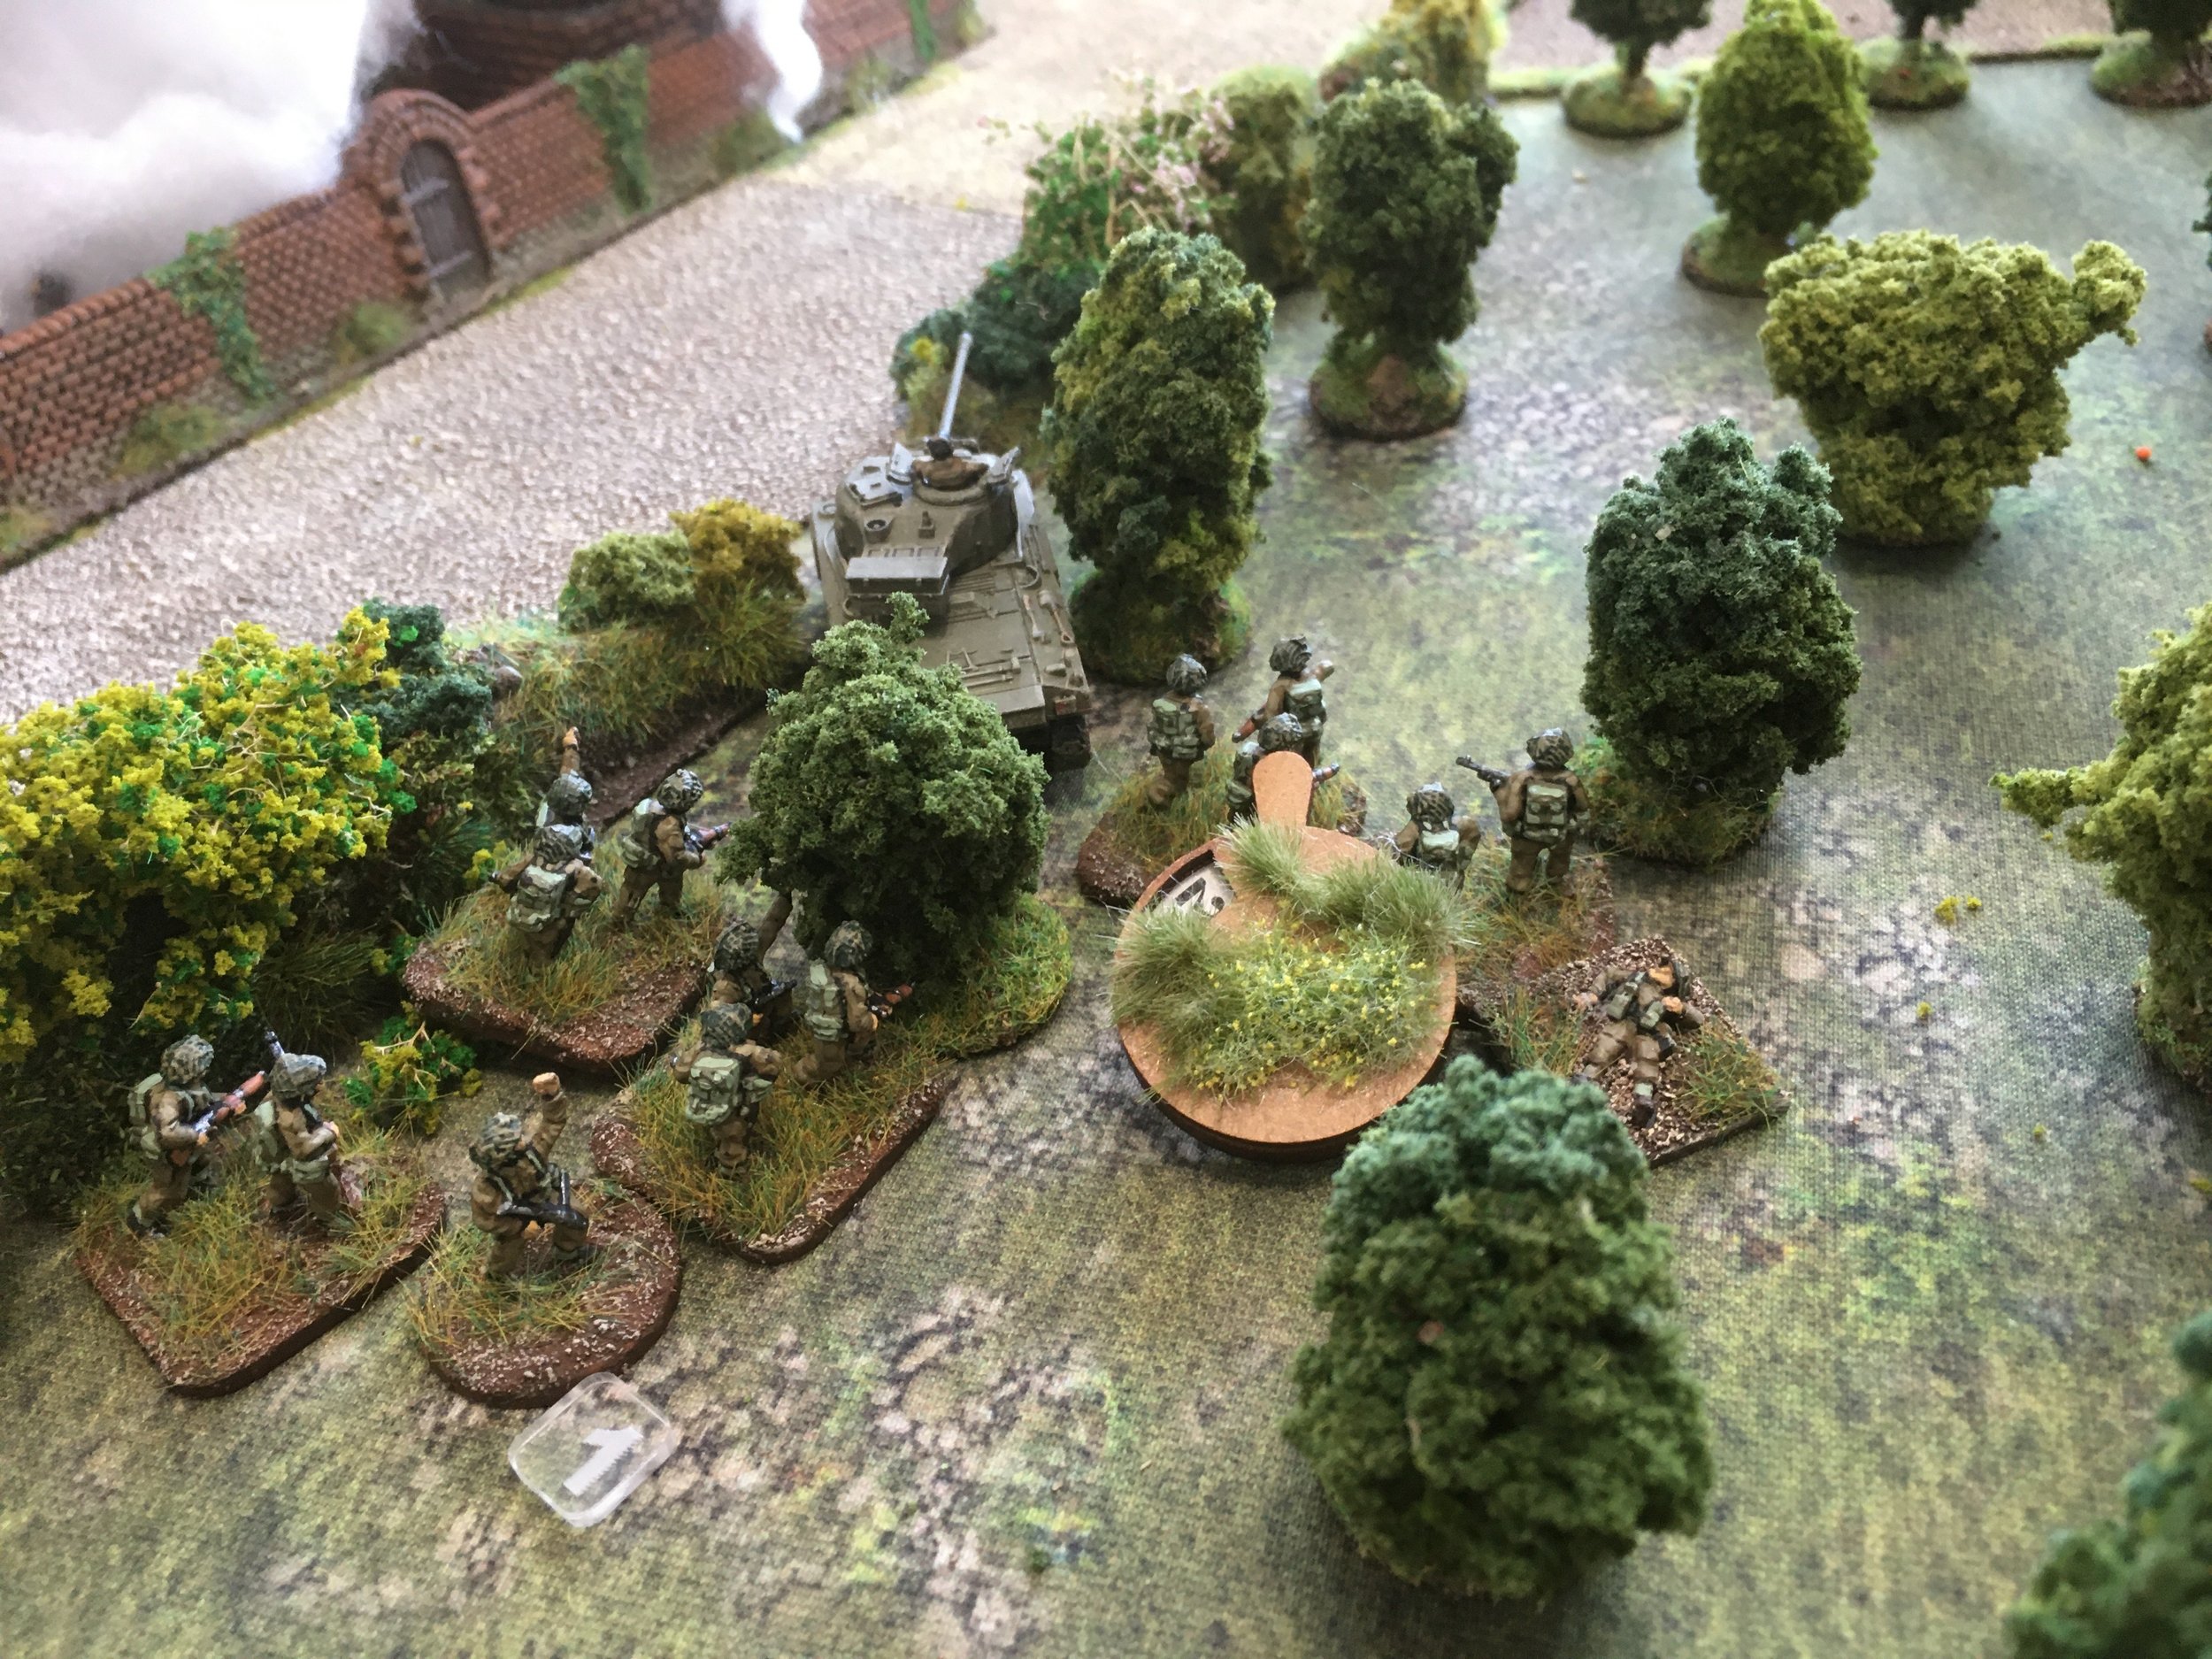 The Welsh infantry continued their unspectacular, but effective, slow and steady advance with 2nd...